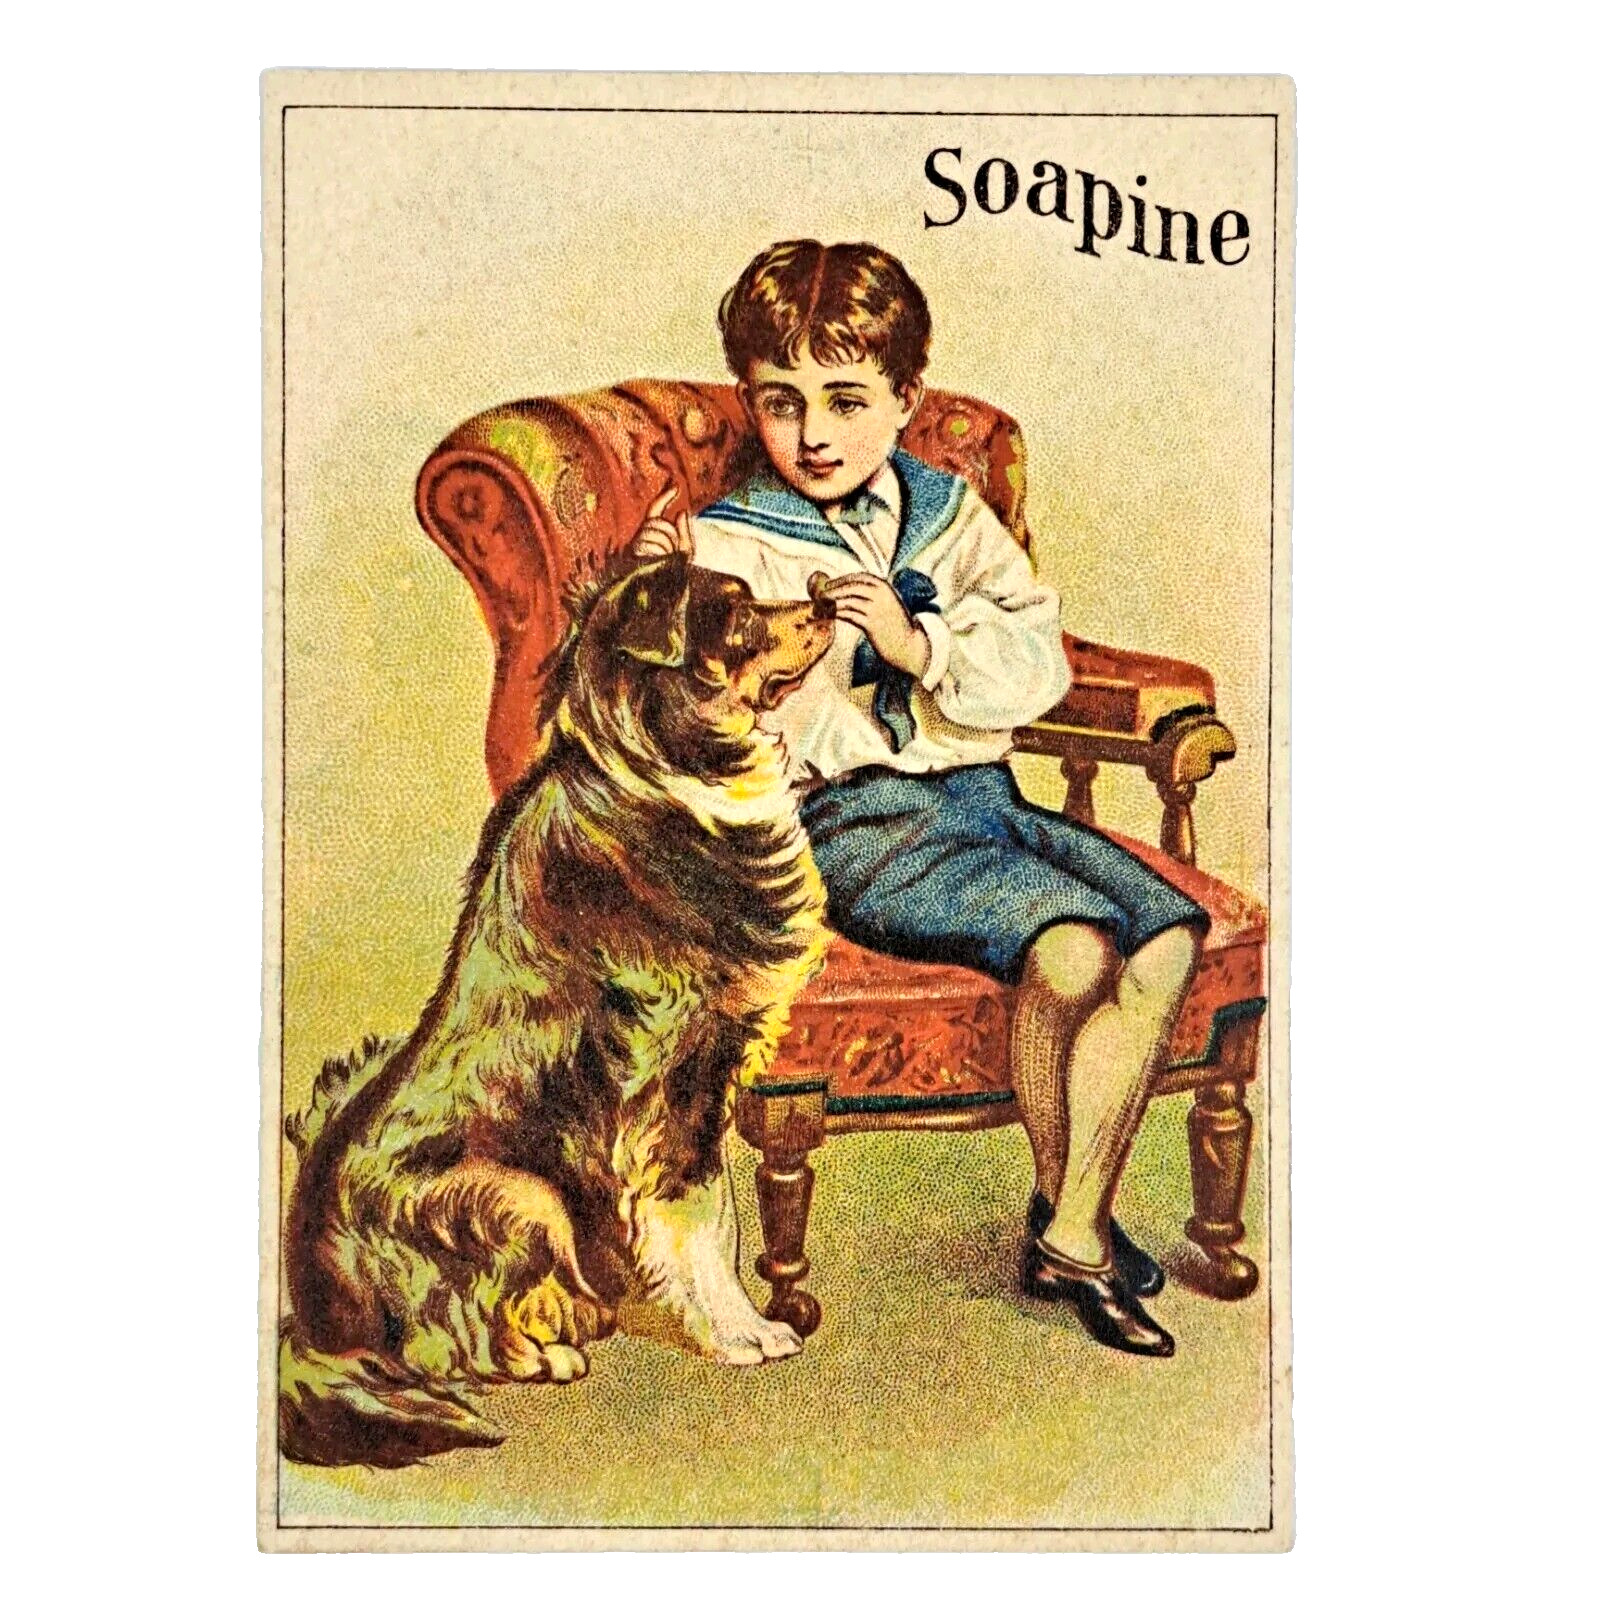 Soapine Trade Card by Kendall Manufacturing Boy with Dog